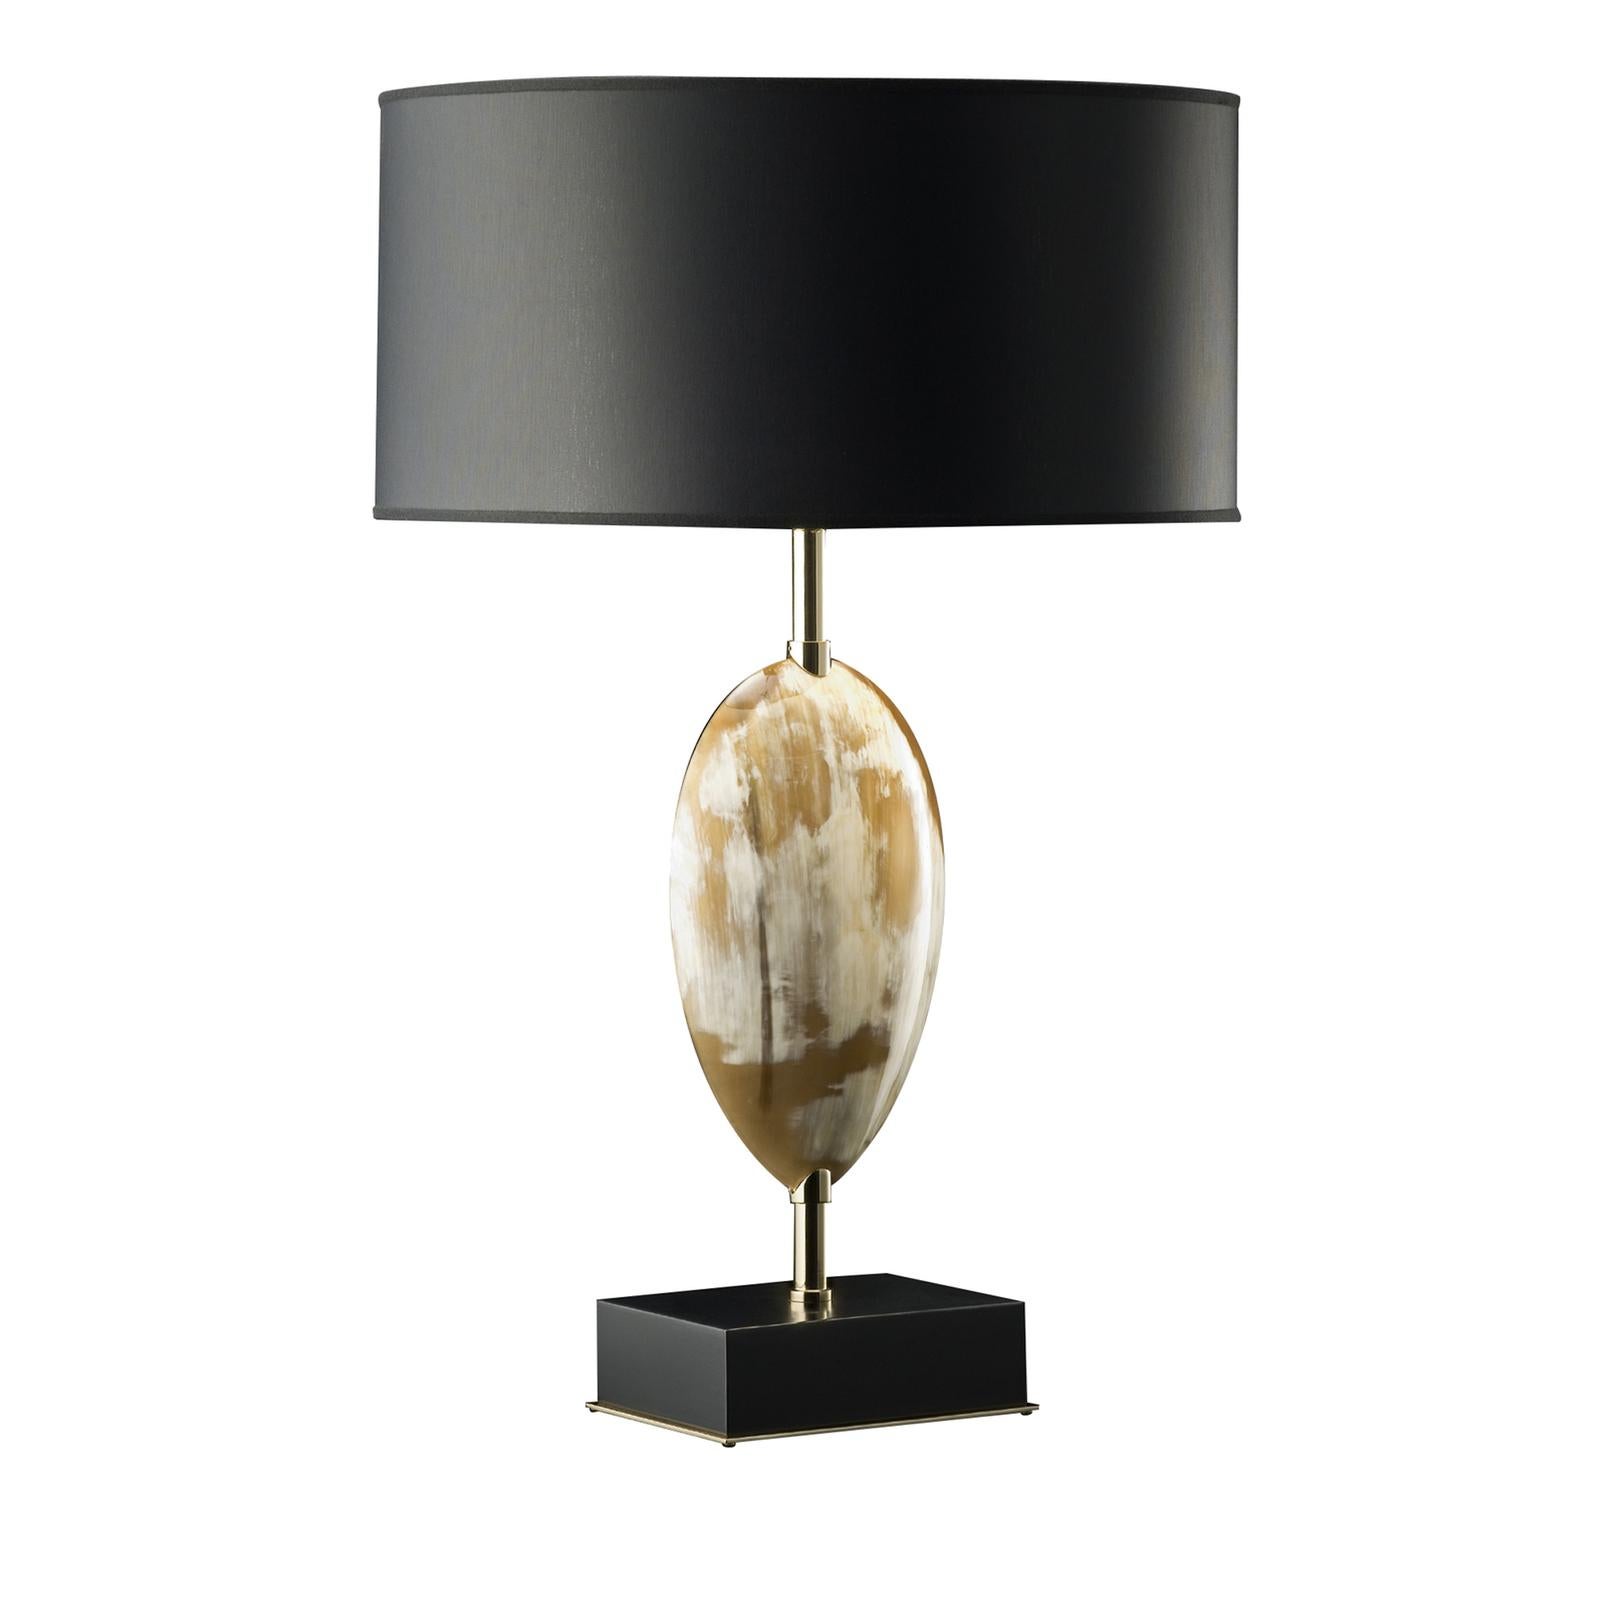 This unique table lamp is a prime example of impeccable artistry that will imbue elegance to any decor with its modern heirloom quality. The square wood base, raised on 24-karat gold-plated brass platform, with a lacquered black gloss finish, acts